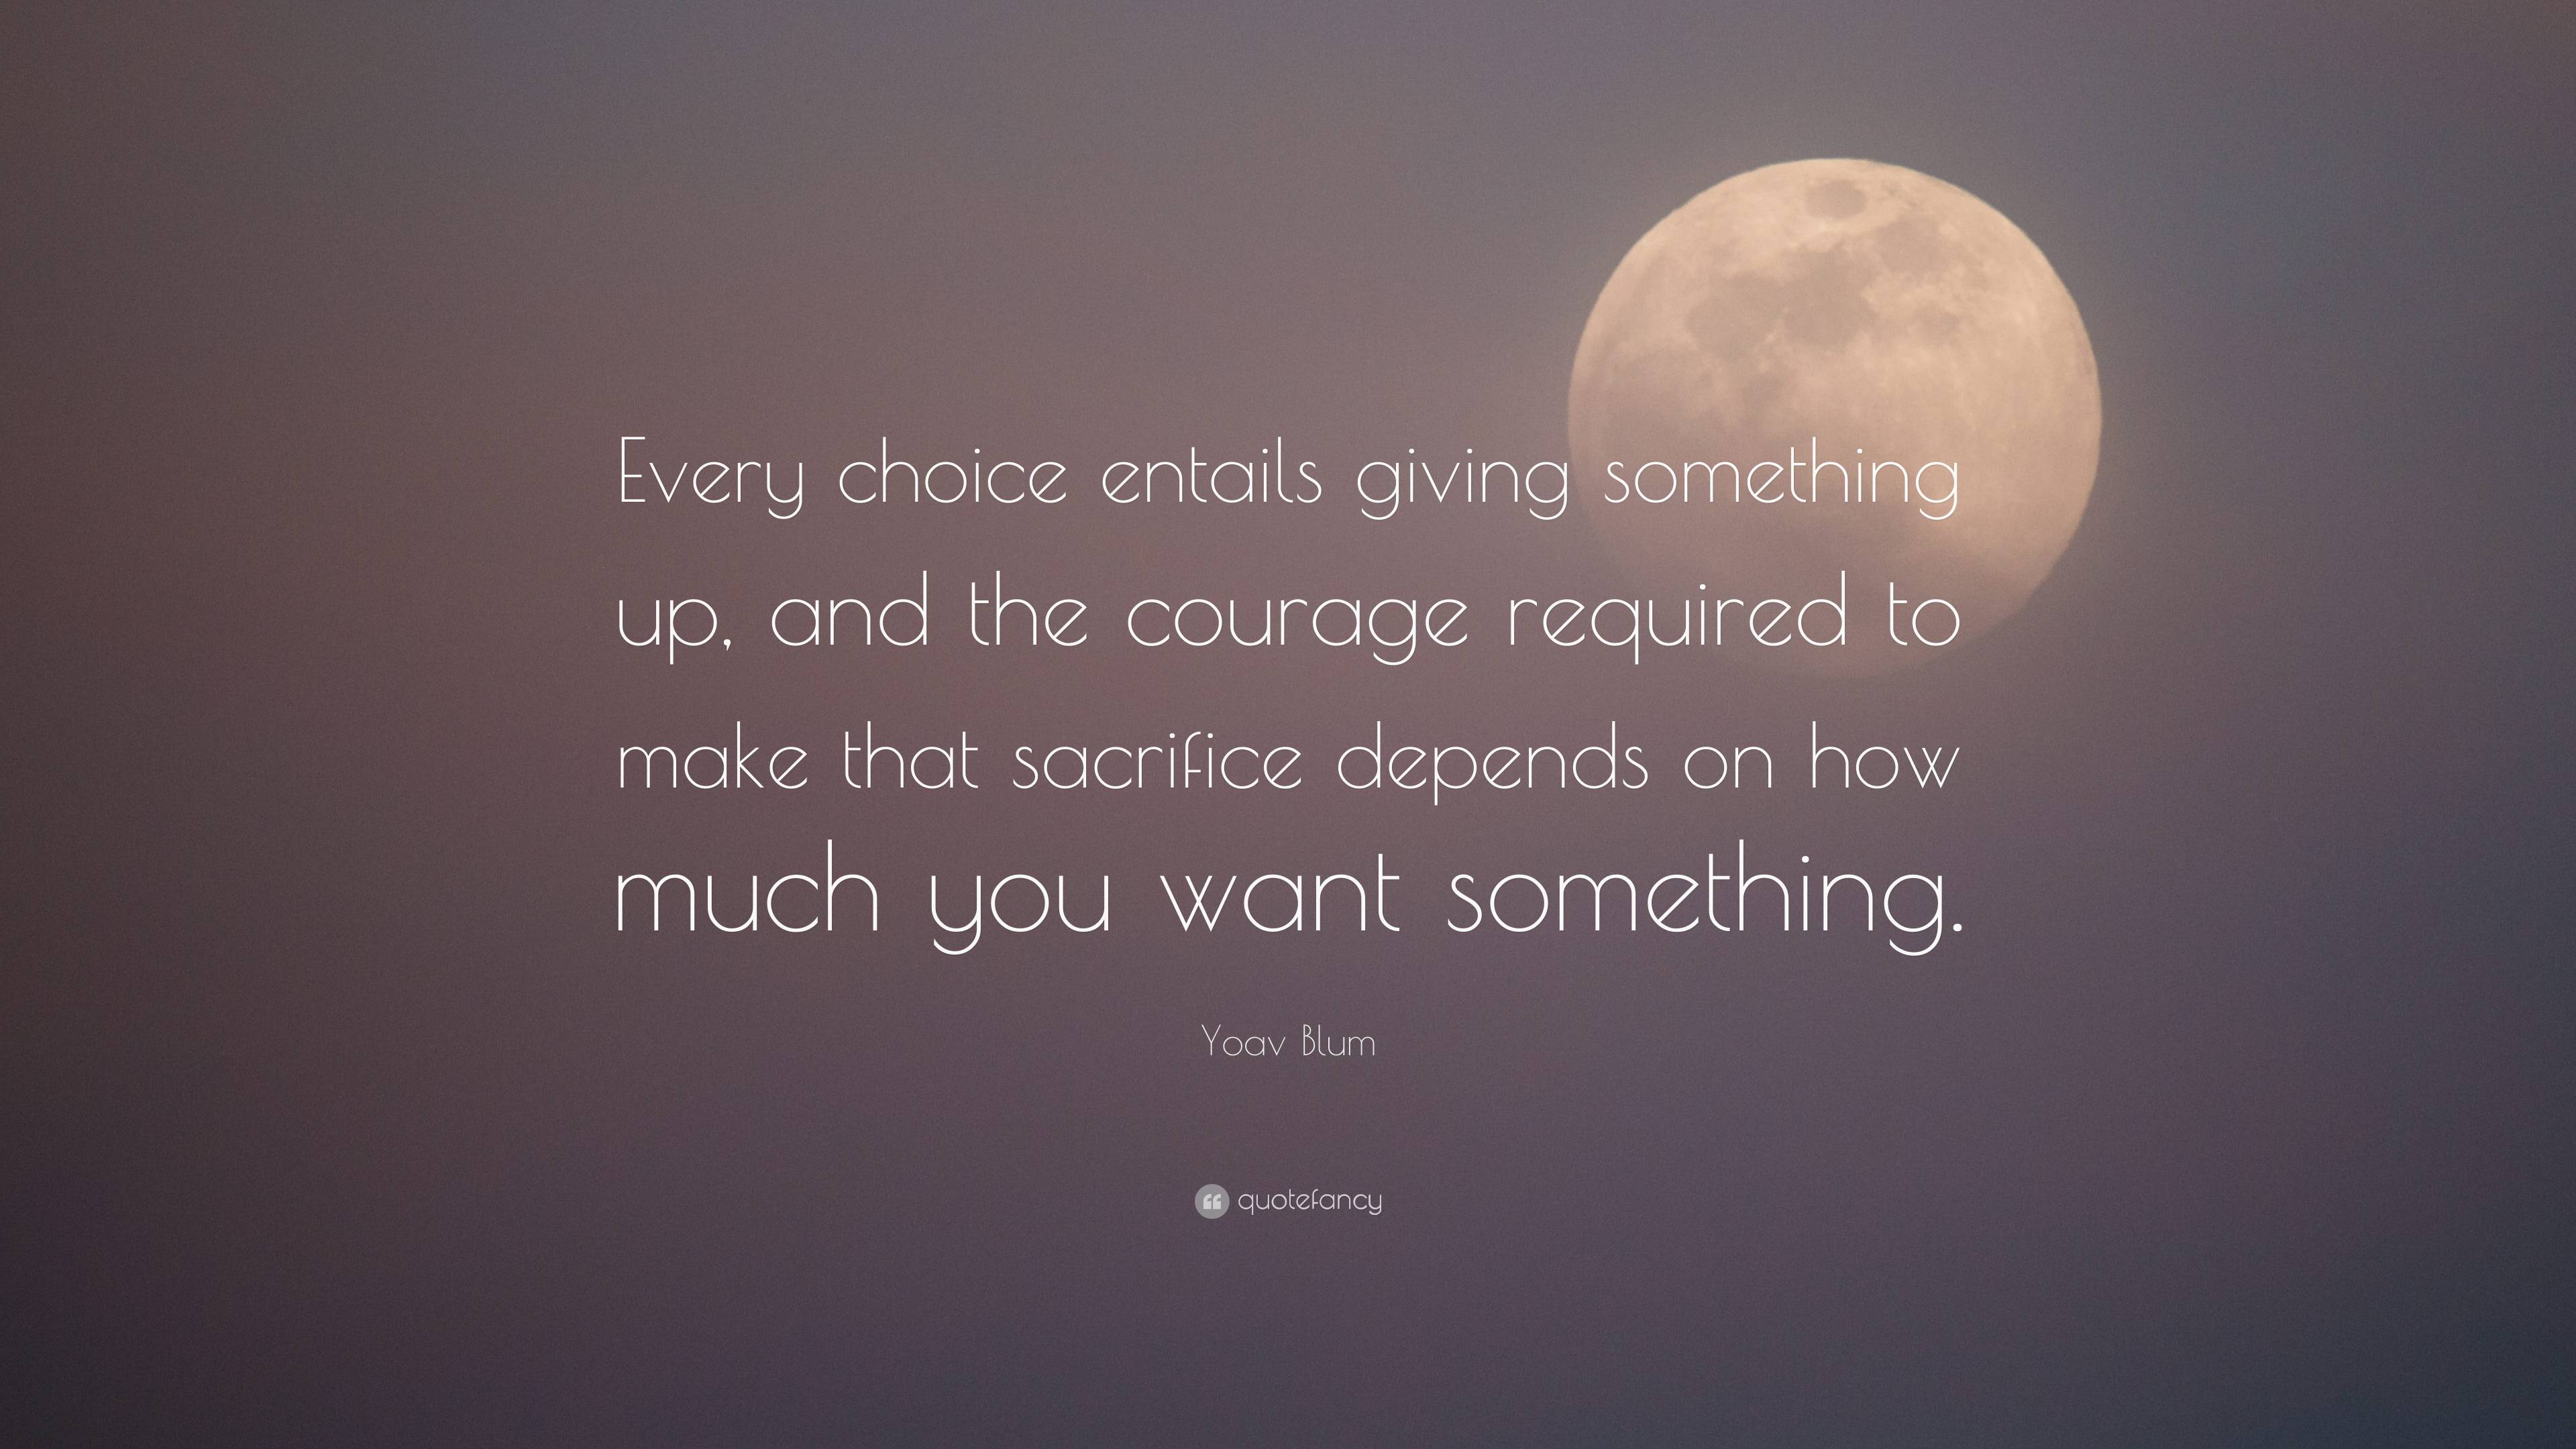 Yoav Blum Quote: “Every choice entails giving something up, and the courage  required to make that sacrifice depends on how much you want s”